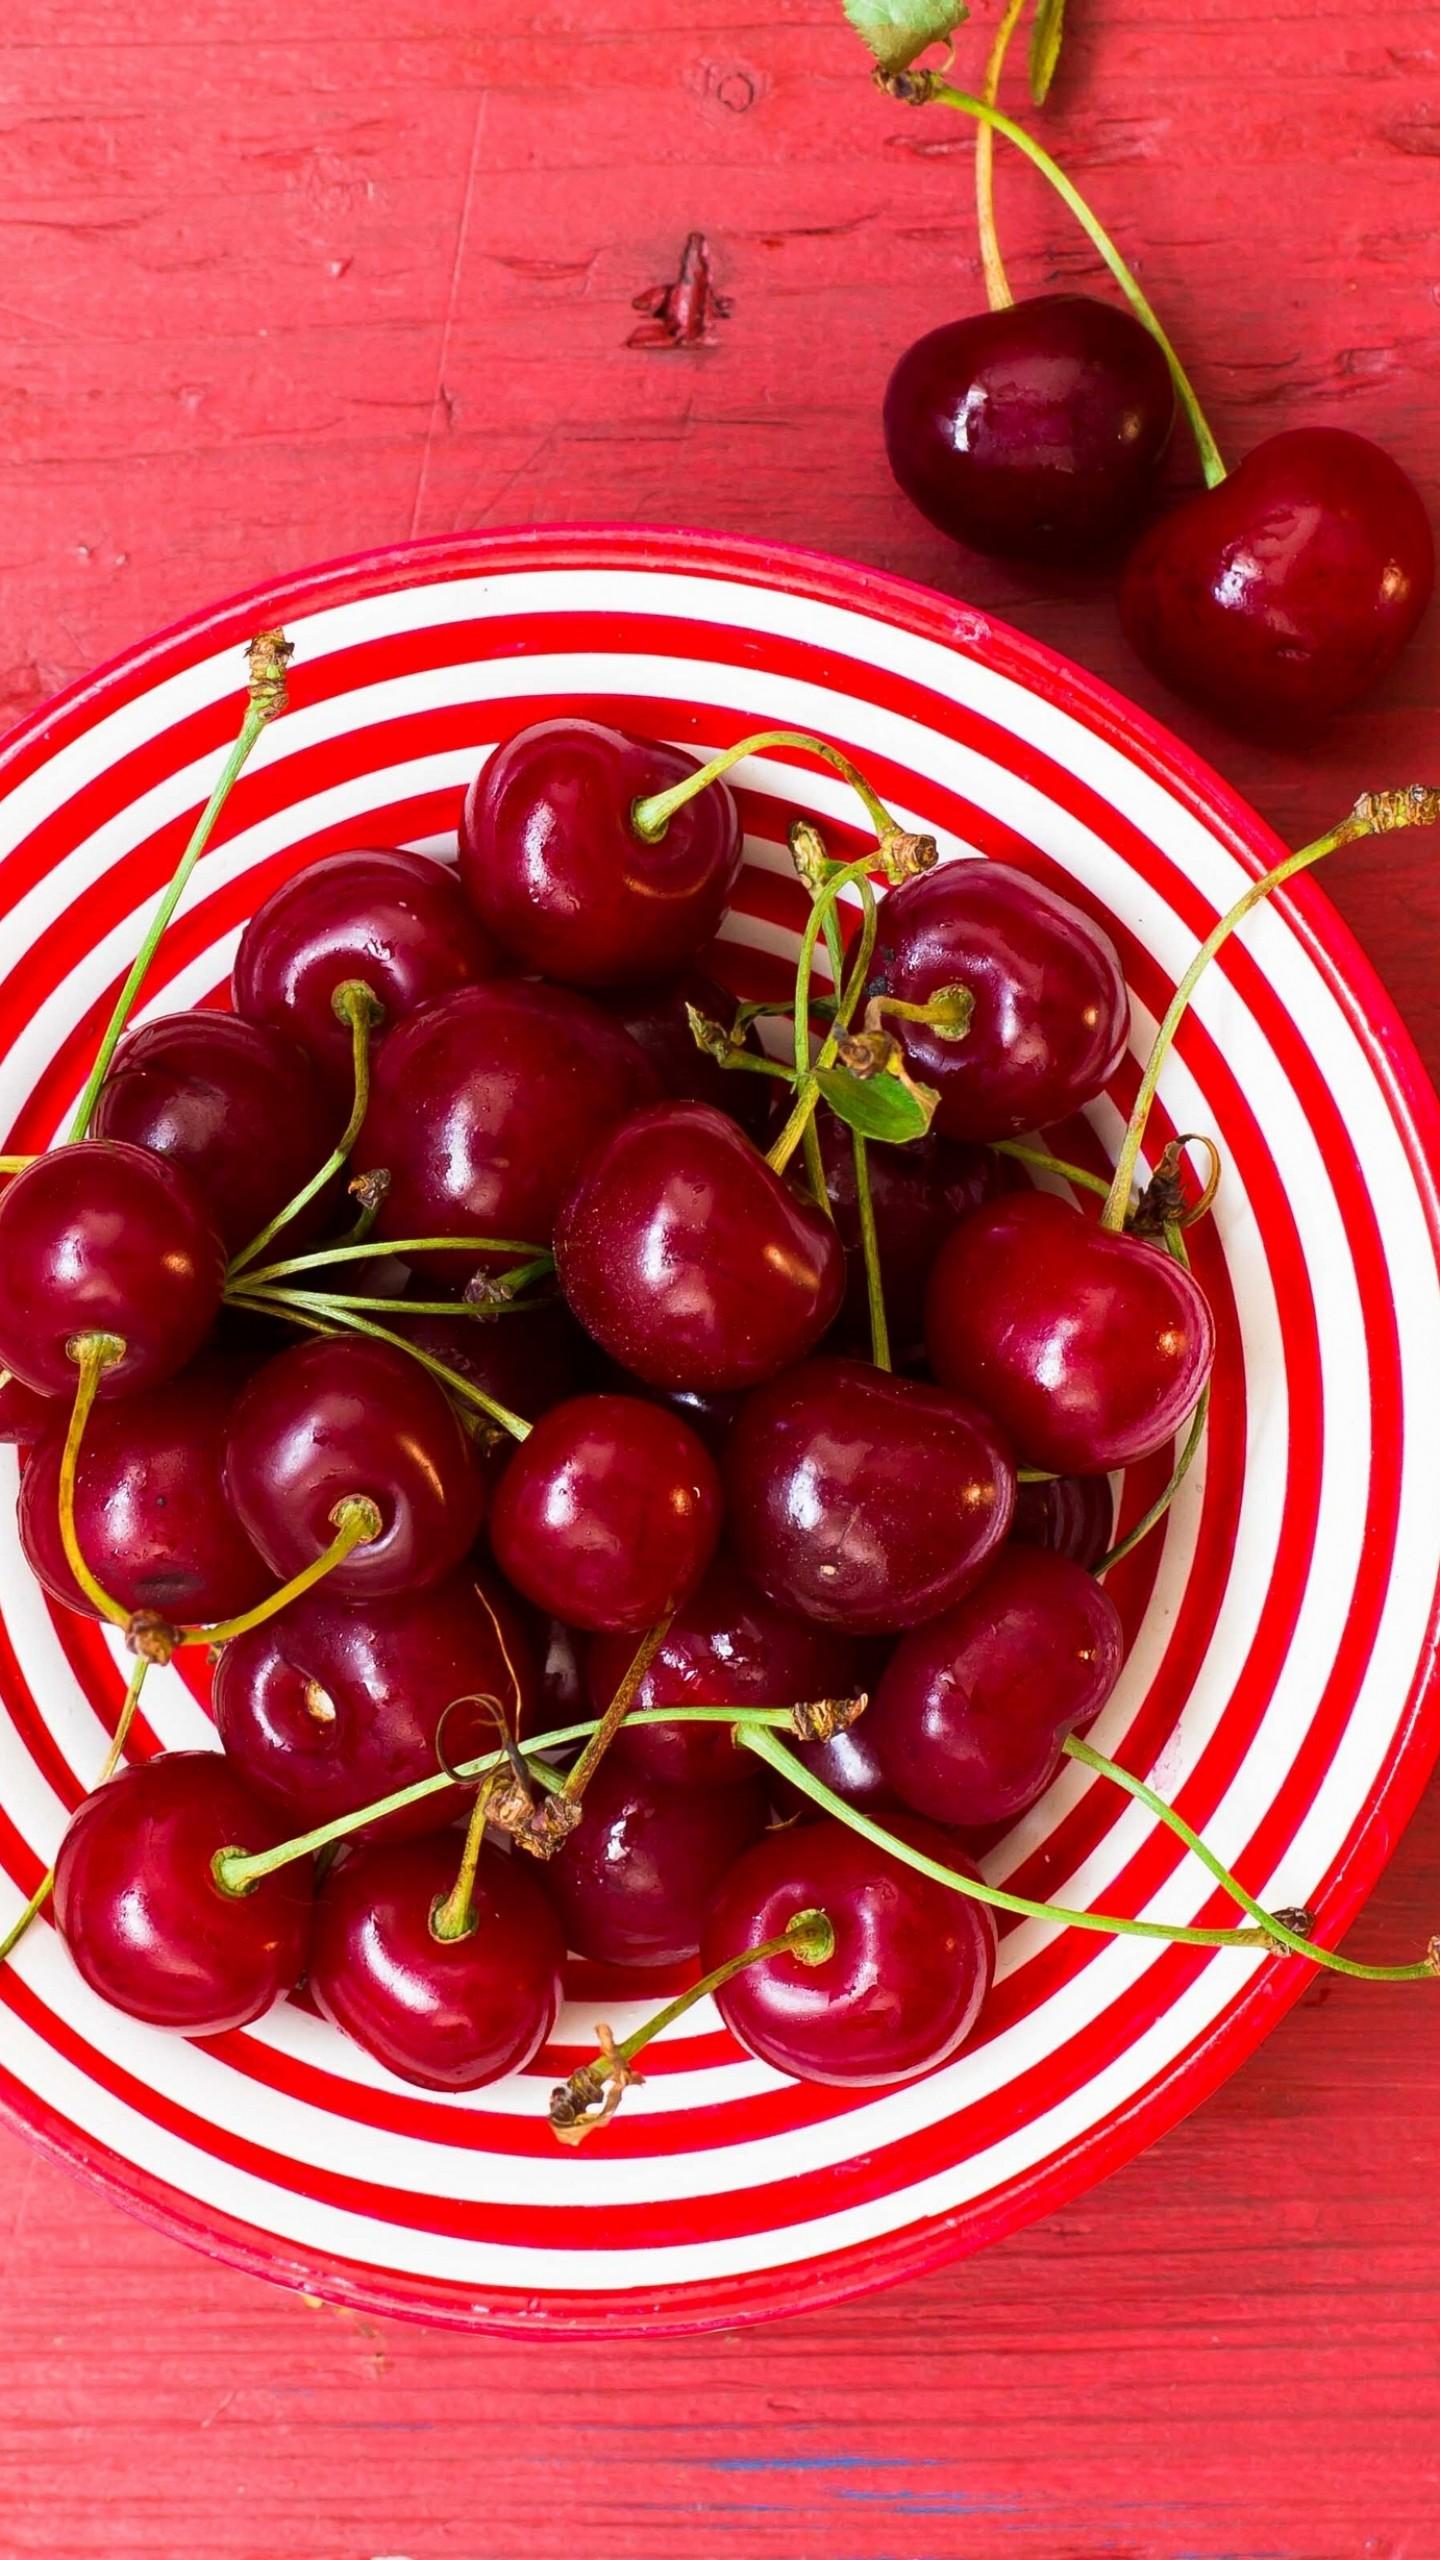 Wallpaper Cherries, Fruits, 4K, Lifestyle,. Wallpaper for iPhone, Android, Mobile and Desktop